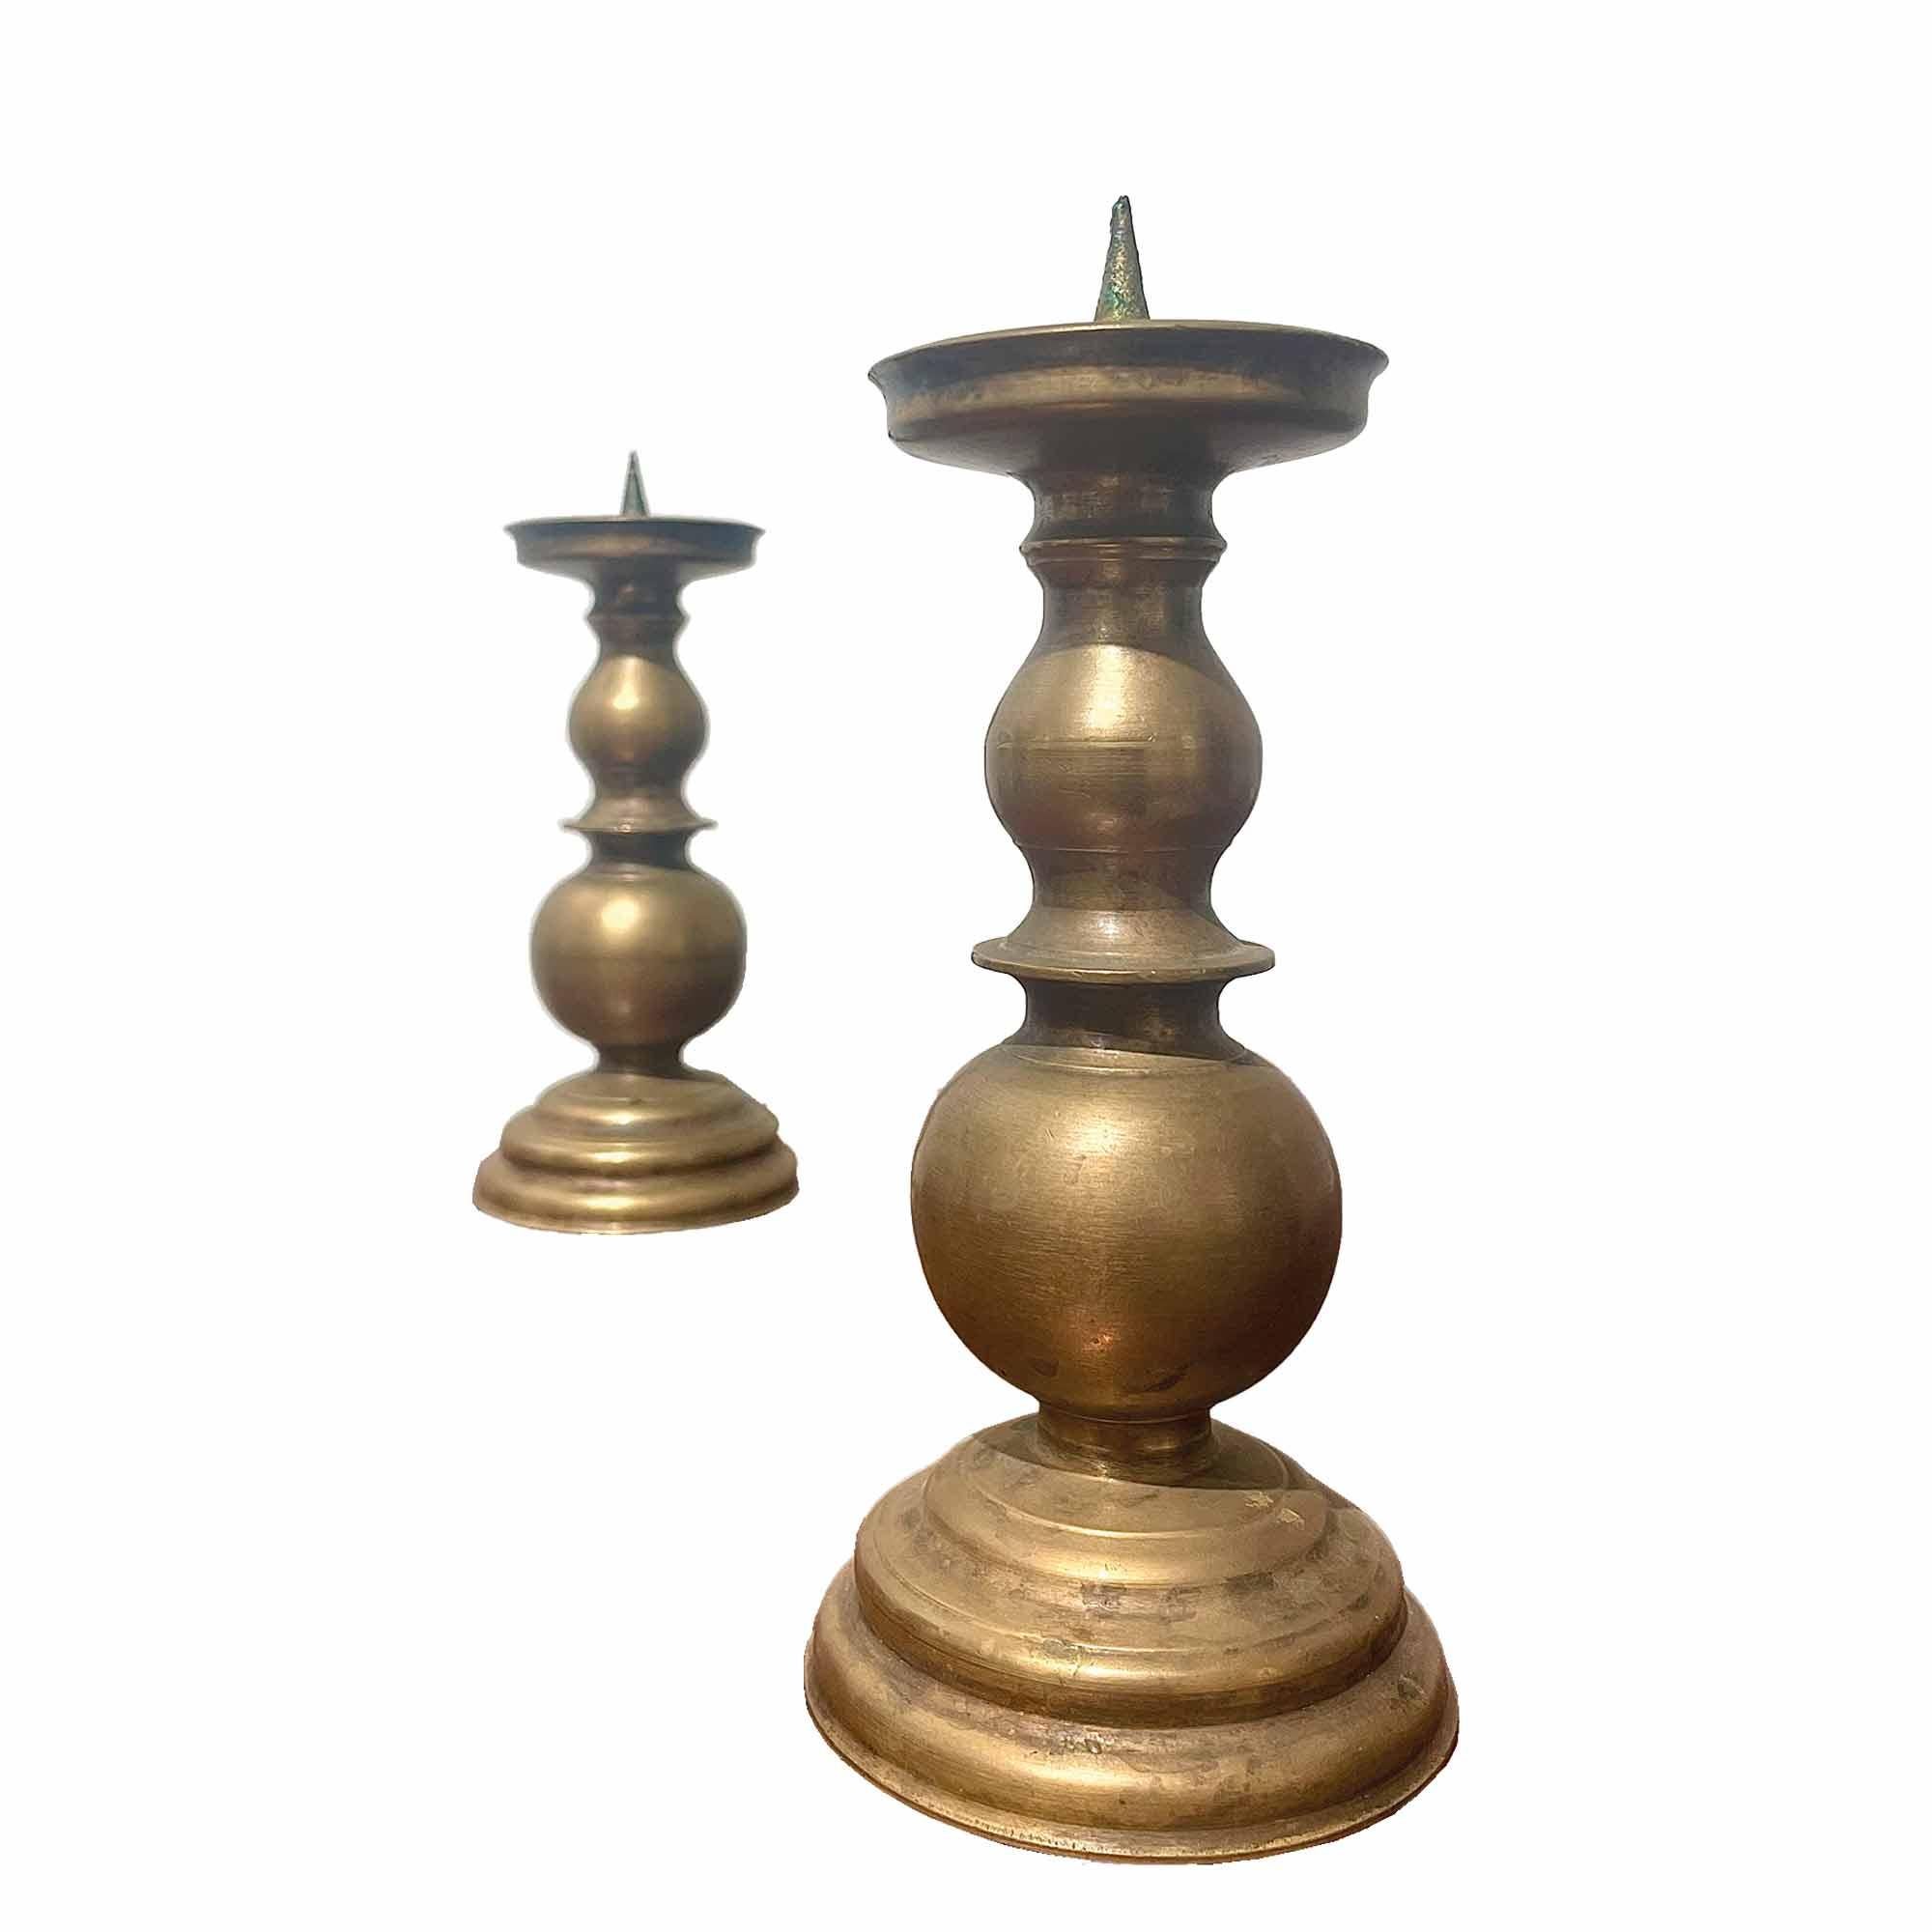 Pair of vintage brass candlesticks, late 19th century. They stand out for their assertive and refined sculptural lines. Their elegant shape adds lots of vintage charm and simplicity. Candle holders can be a decorative and practical addition to your